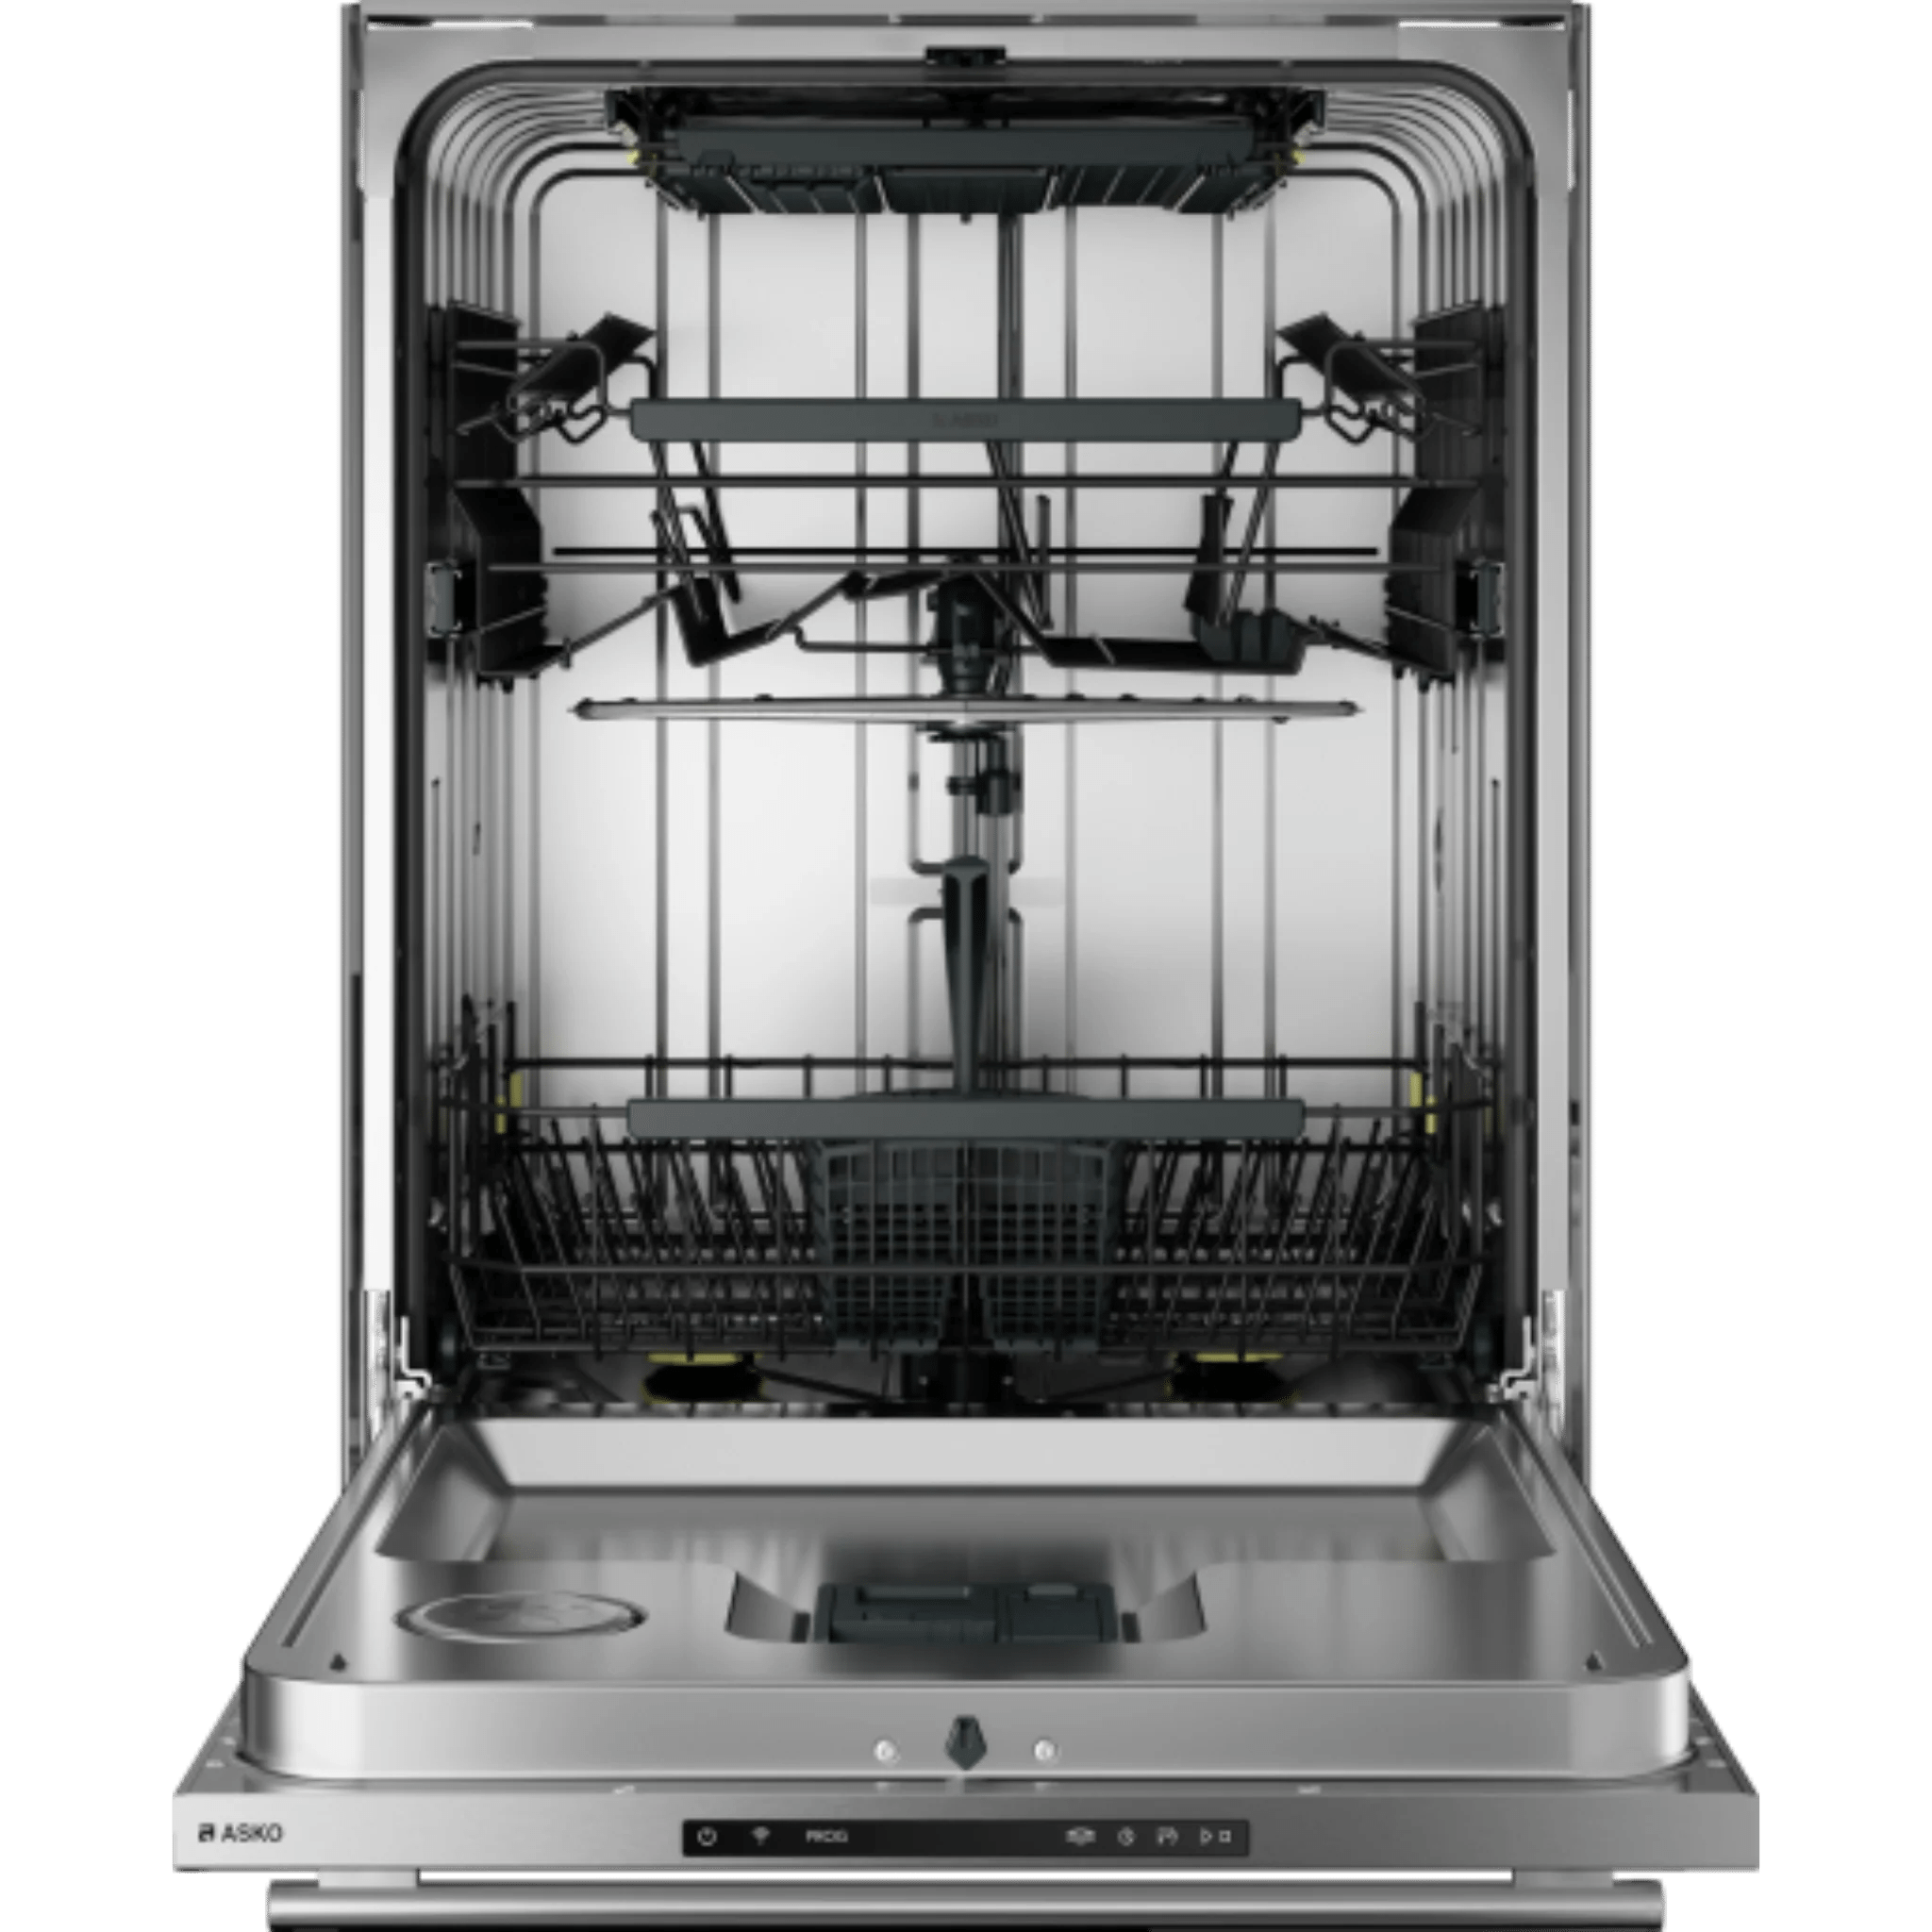 Asko Logic 24 Inch Wide 16 Place Setting Built-In Top Control Dishwasher with Pocket Handle, XXL Tub, Turbo Combi Drying™, and Auto Door Open Drying™ Dishwashers DBI564IXXLS Luxury Appliances Direct